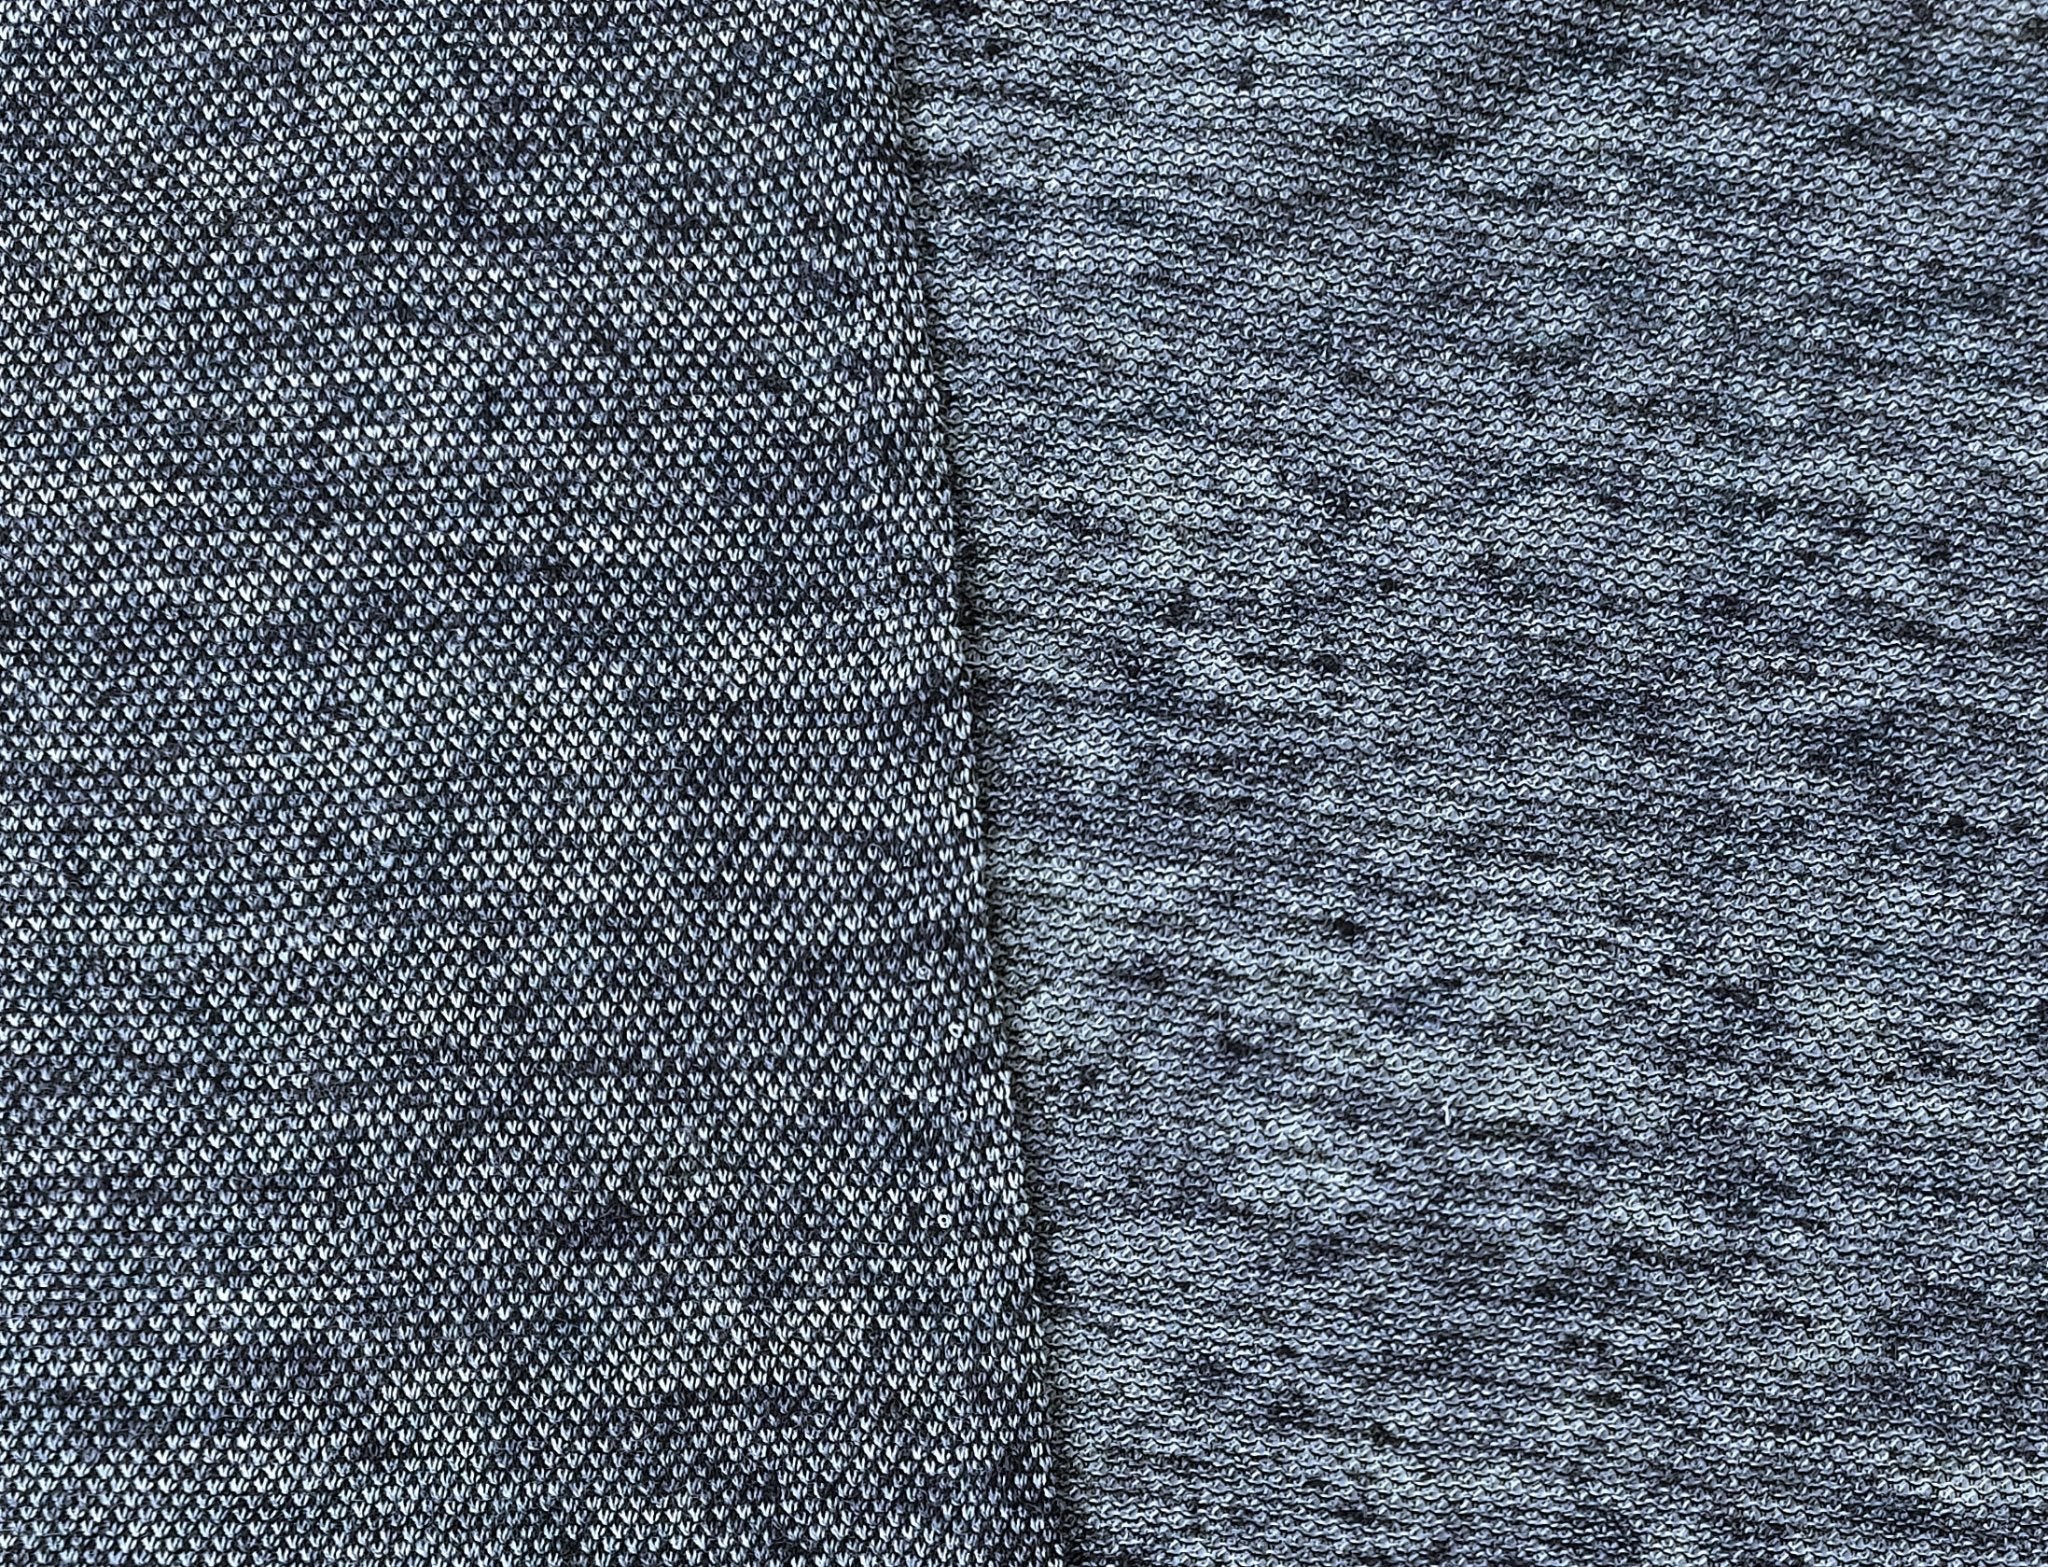 Navy Melange Knit Fabric in Linen Polyester Cotton Blend 4339 - The Linen Lab - Navy